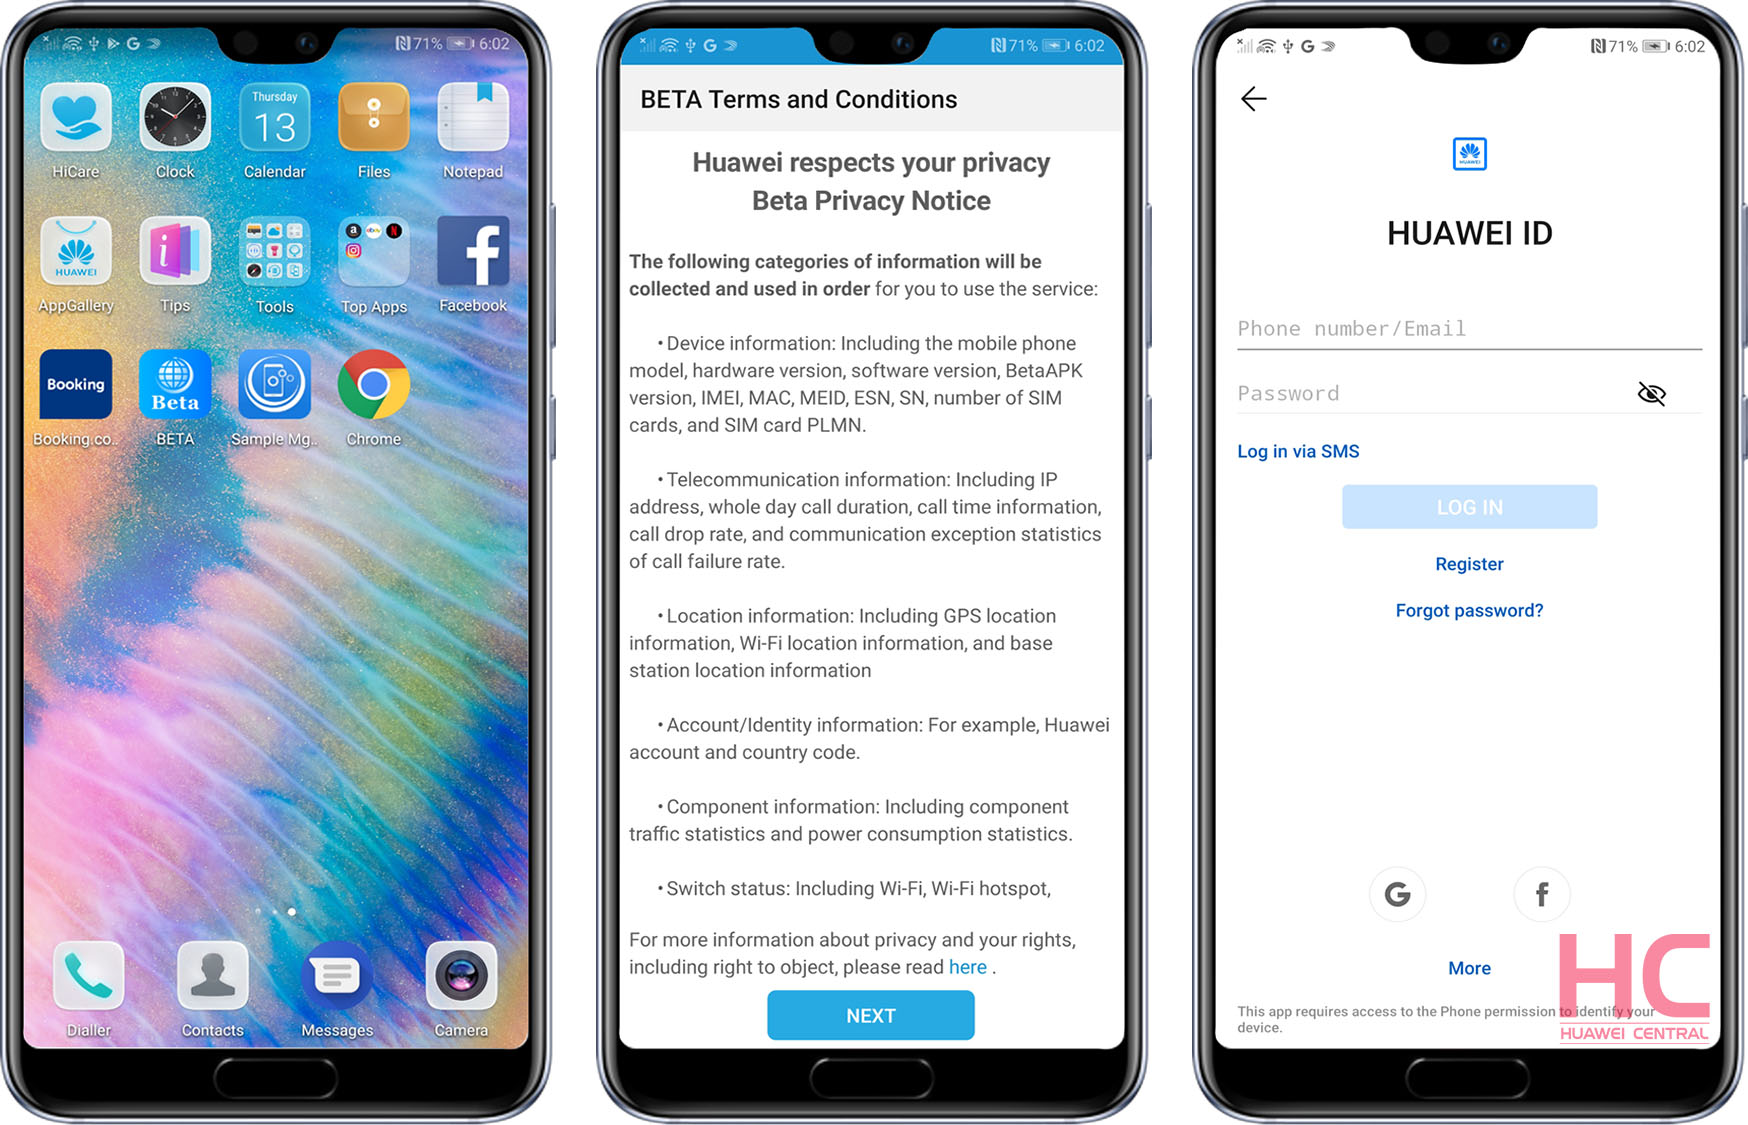 How to join the EMUI Beta user program - Huawei Central